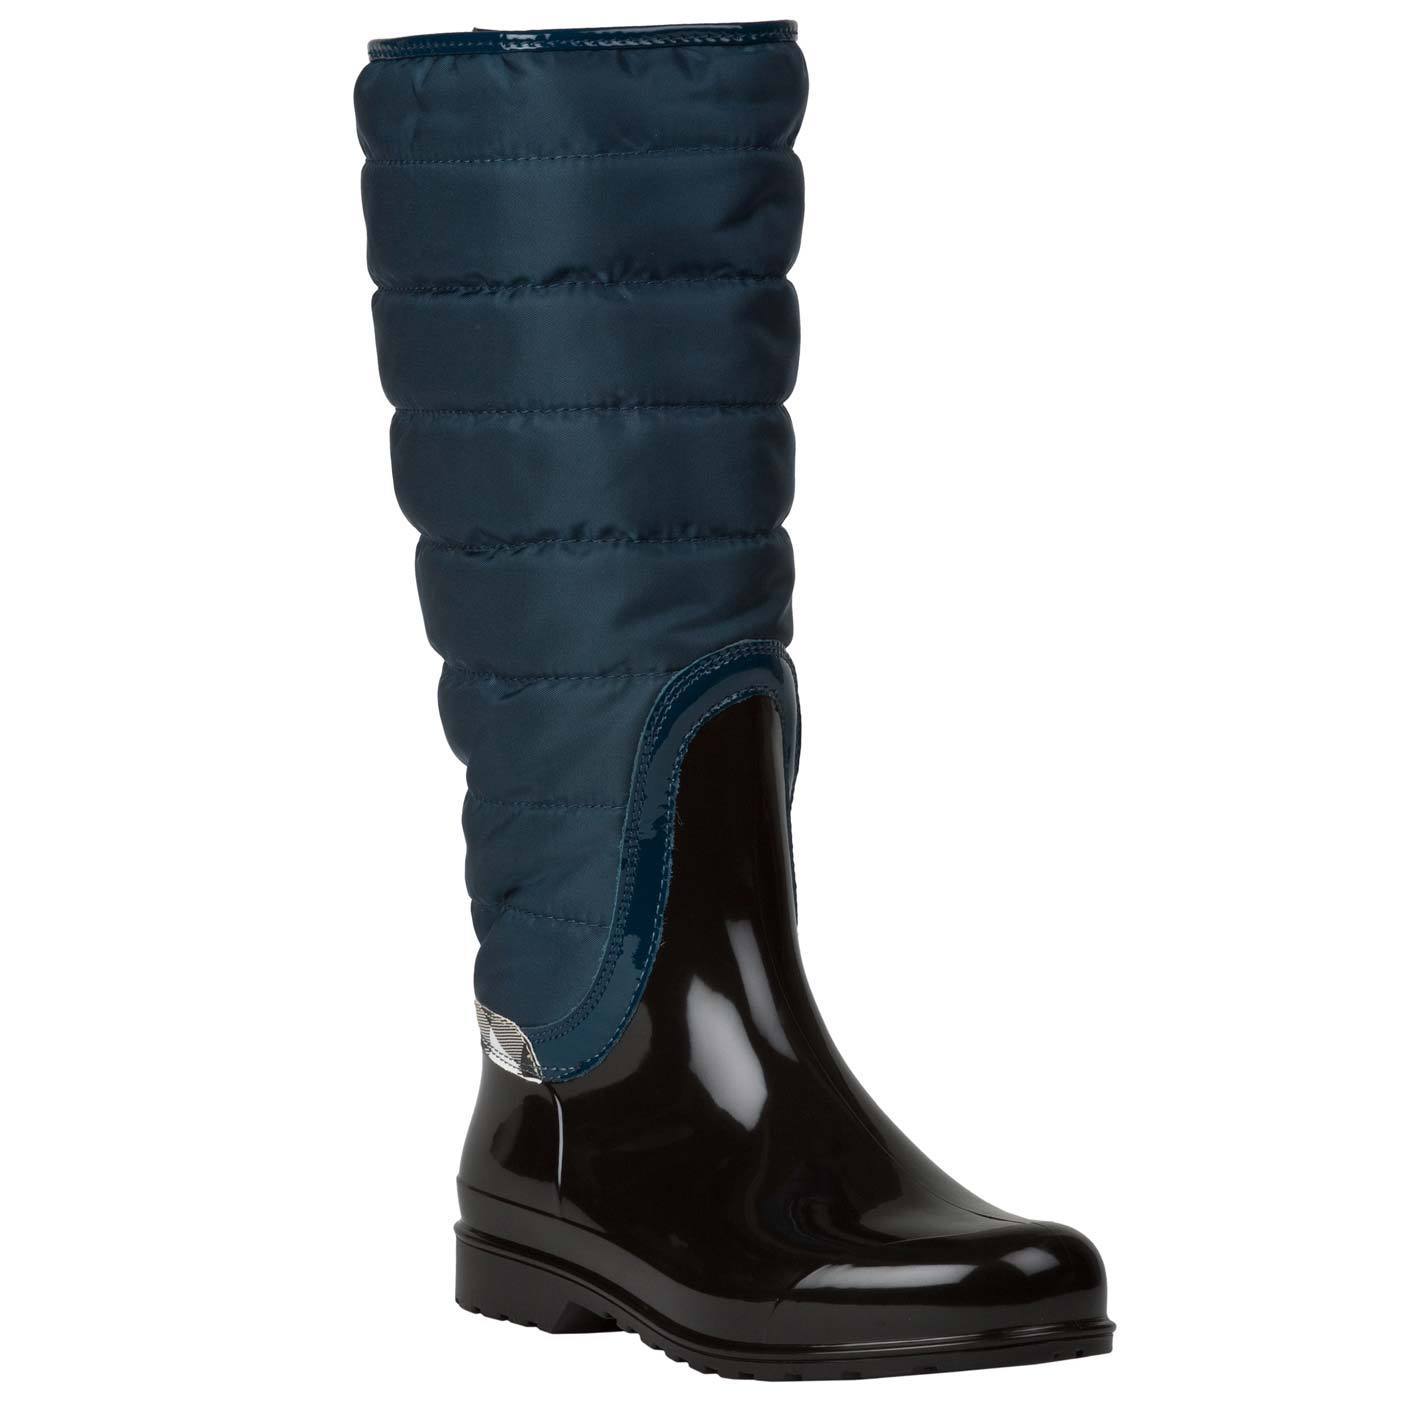 Shop Burberry Women's Blue Quilted Insulated Rain Boots - Free Shipping ...